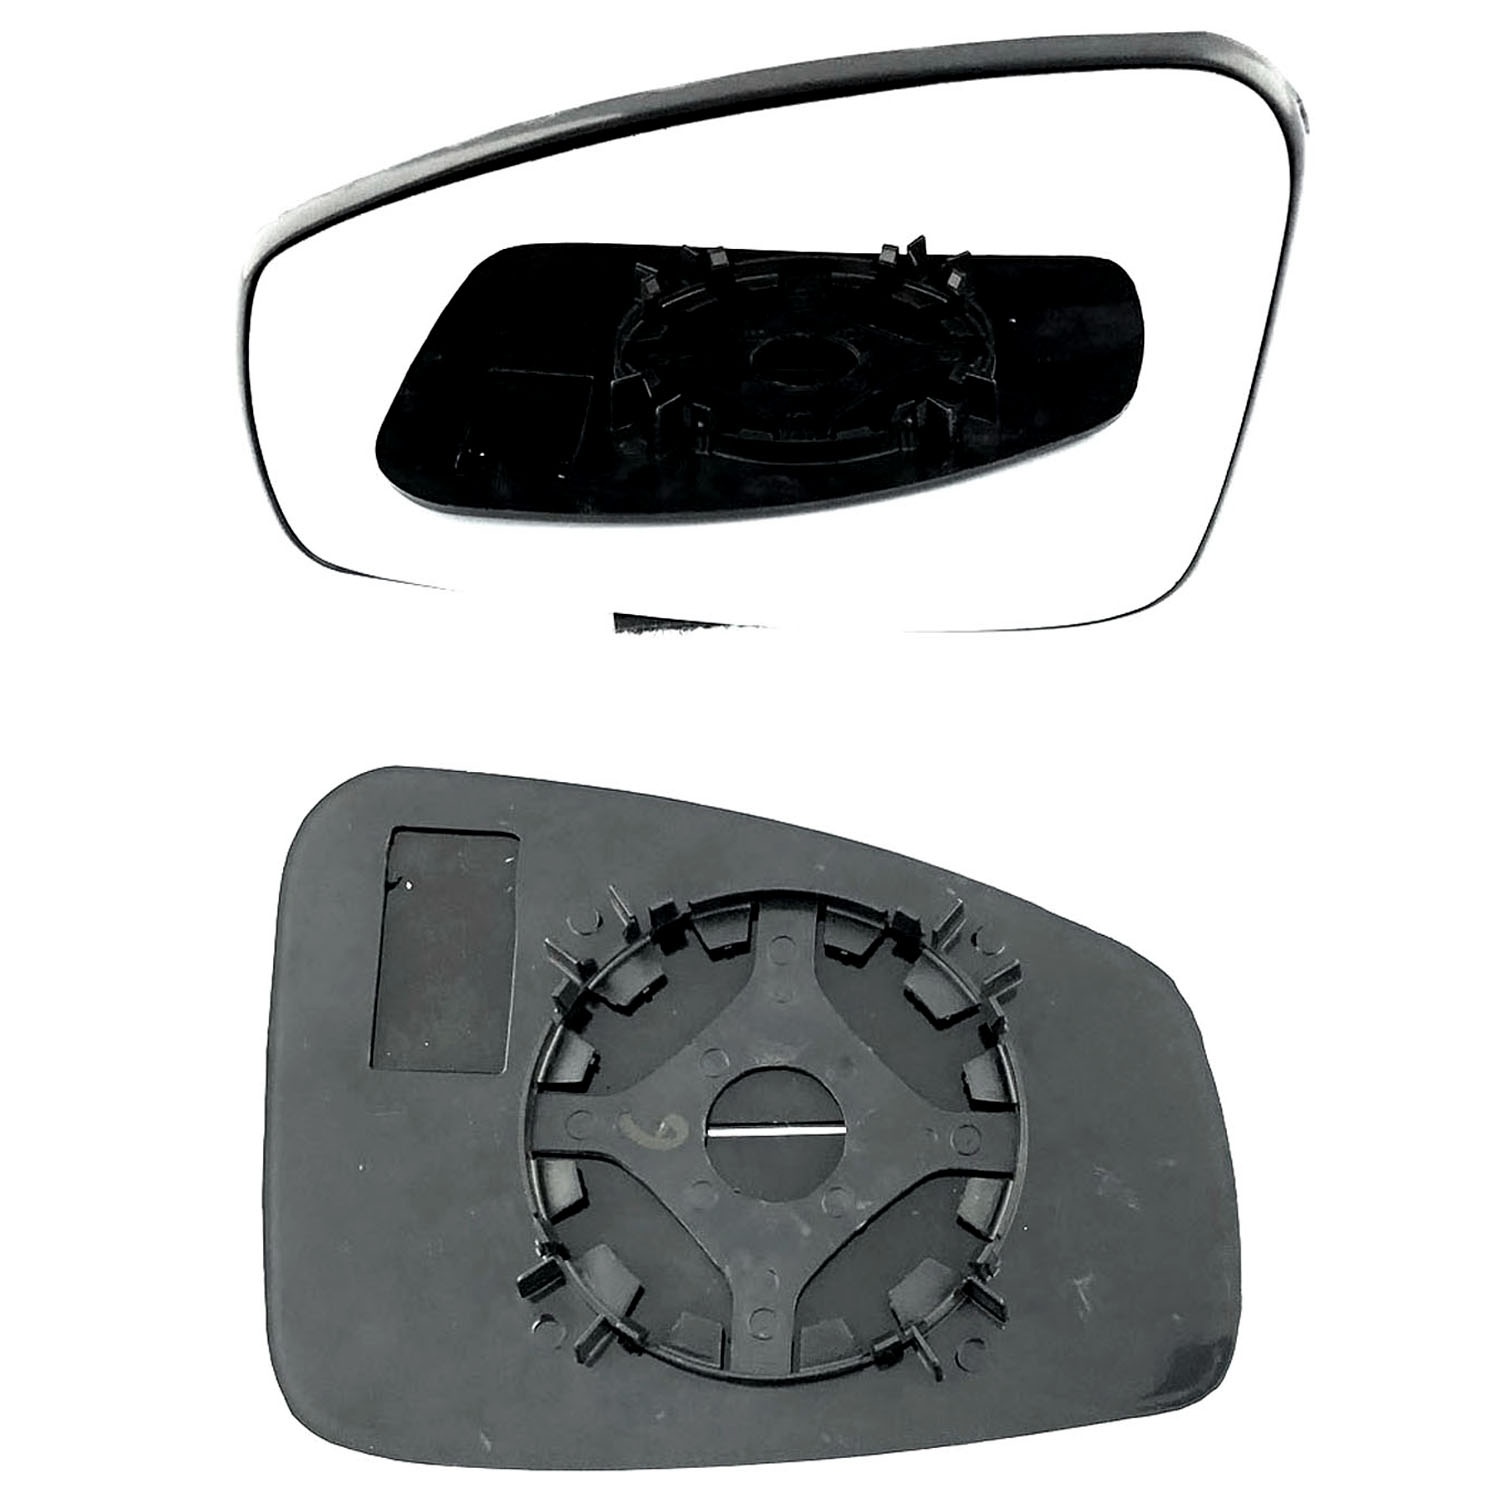 Renault Megane Wing Mirror Glass With Base LEFT HAND ( UK Passenger Side ) 2008 to 2015 – Convex Wing Mirror